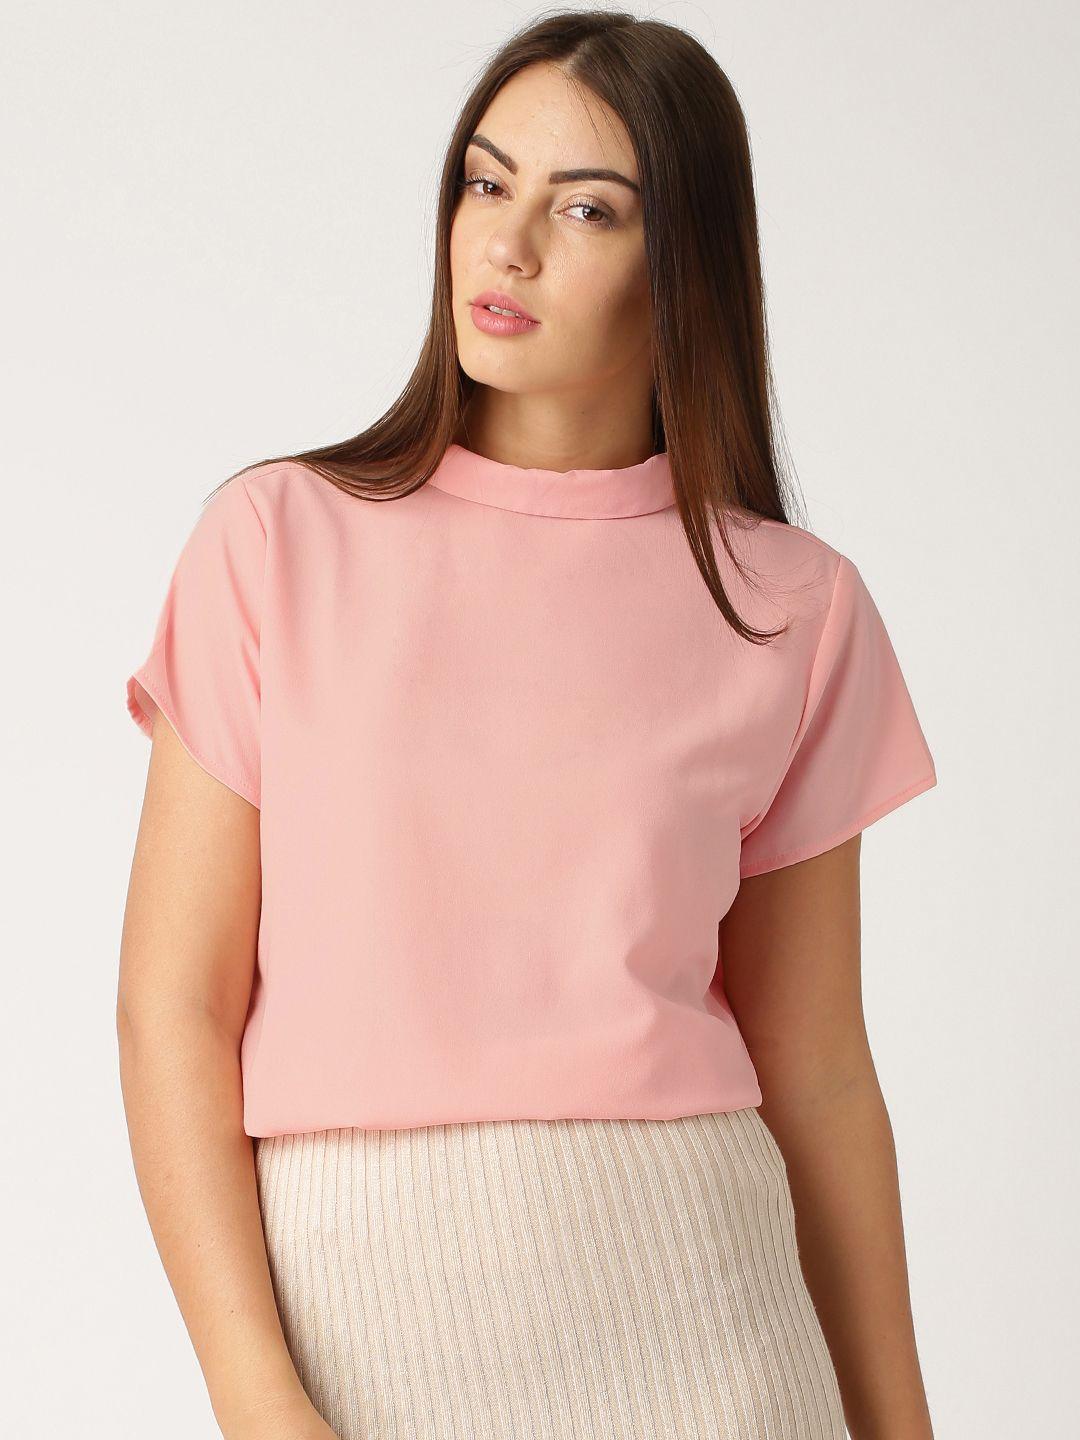 ether pink polyester boxy top